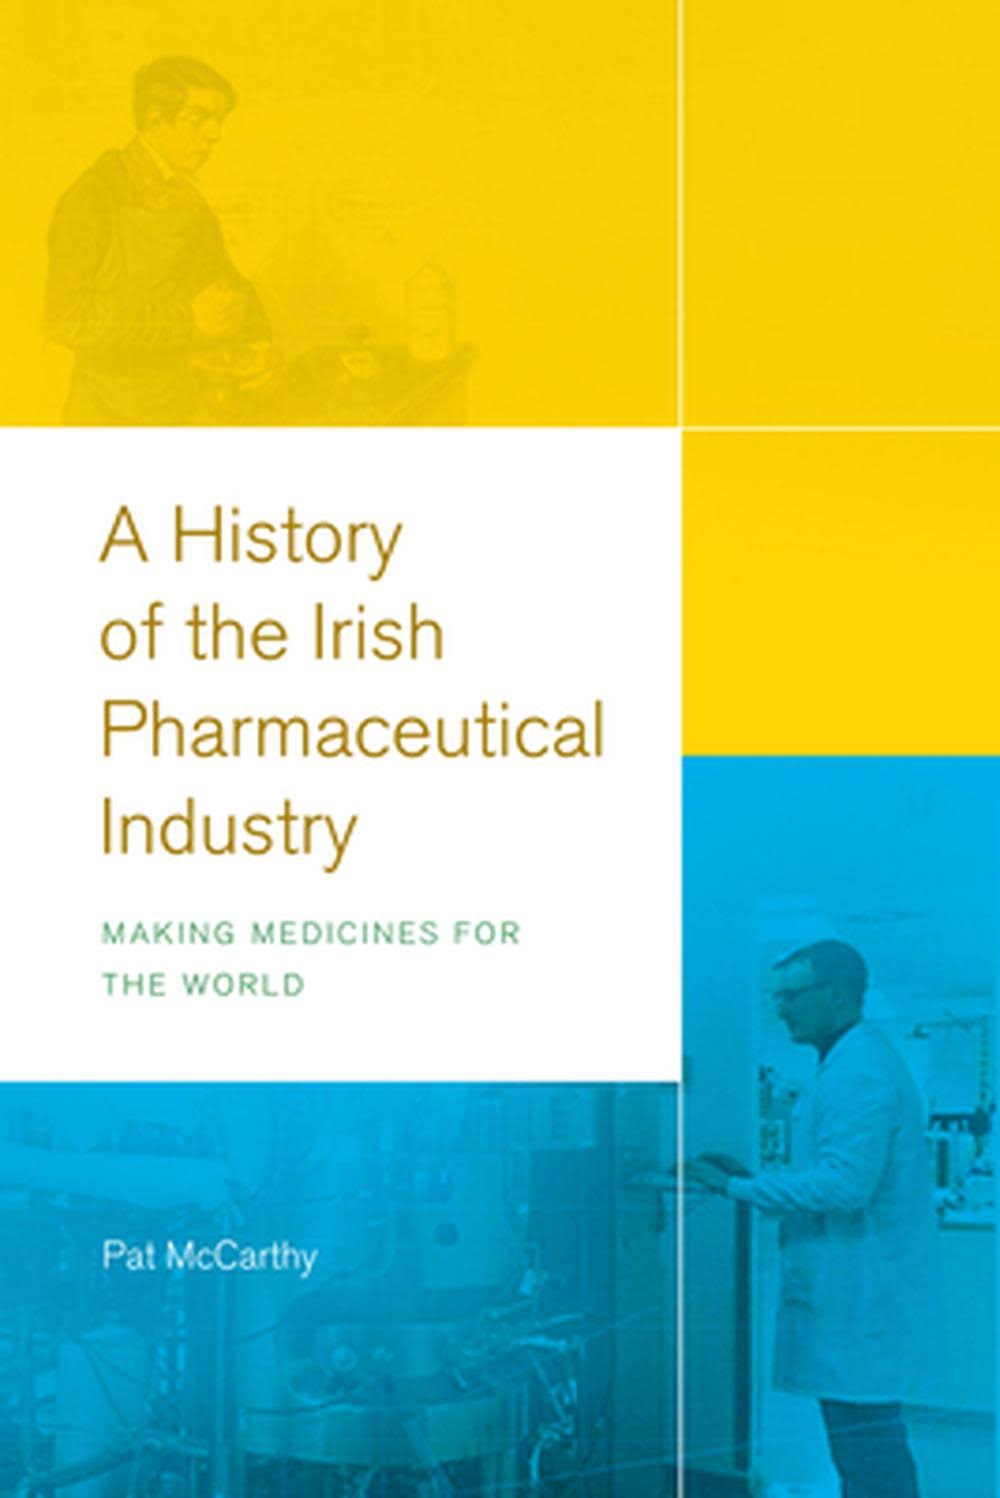 A History of the Irish Pharmaceutical Industry: Making Medicines for the World [Book]